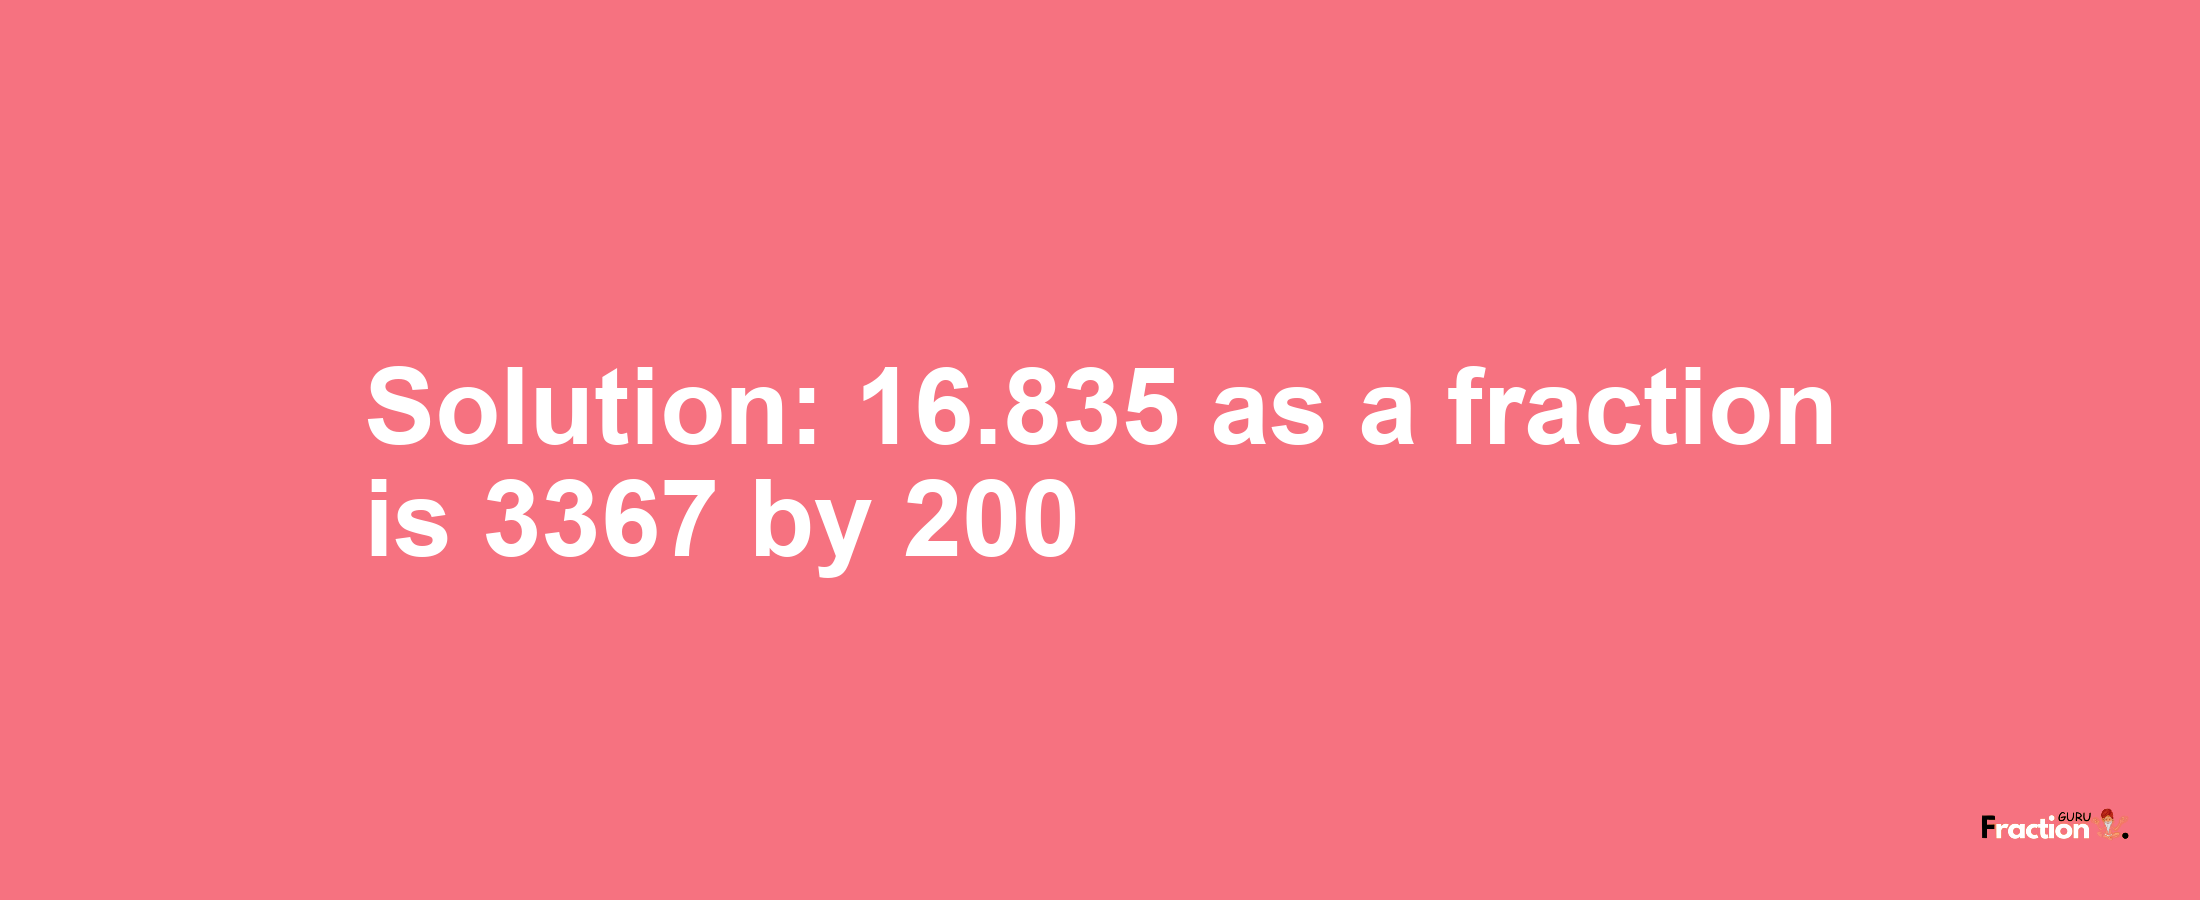 Solution:16.835 as a fraction is 3367/200